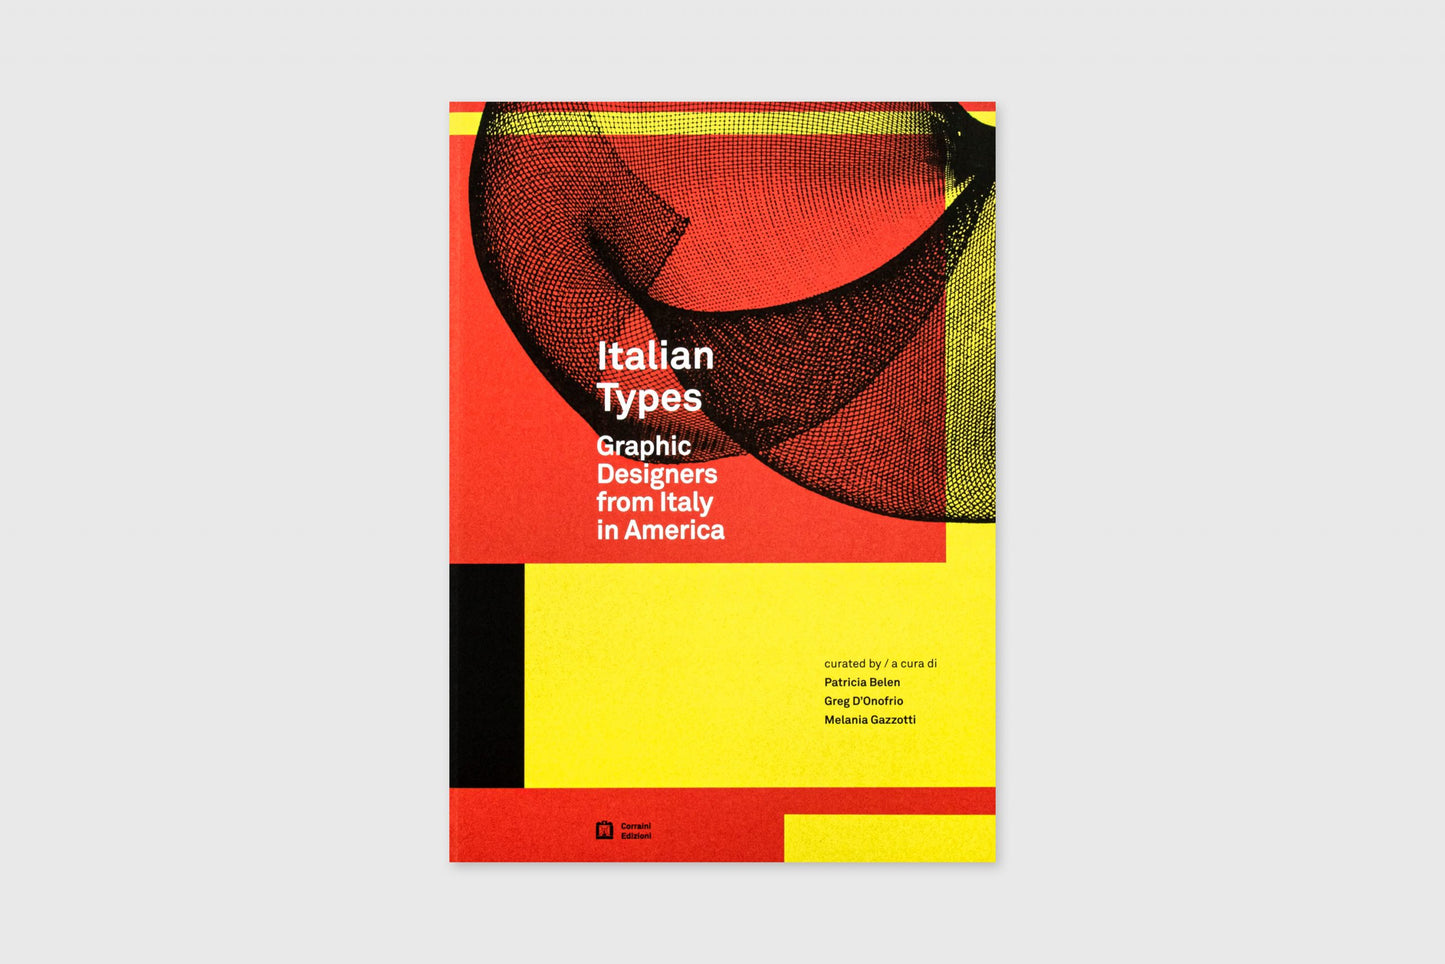 Italian Types: Graphic Designers from Italy to America